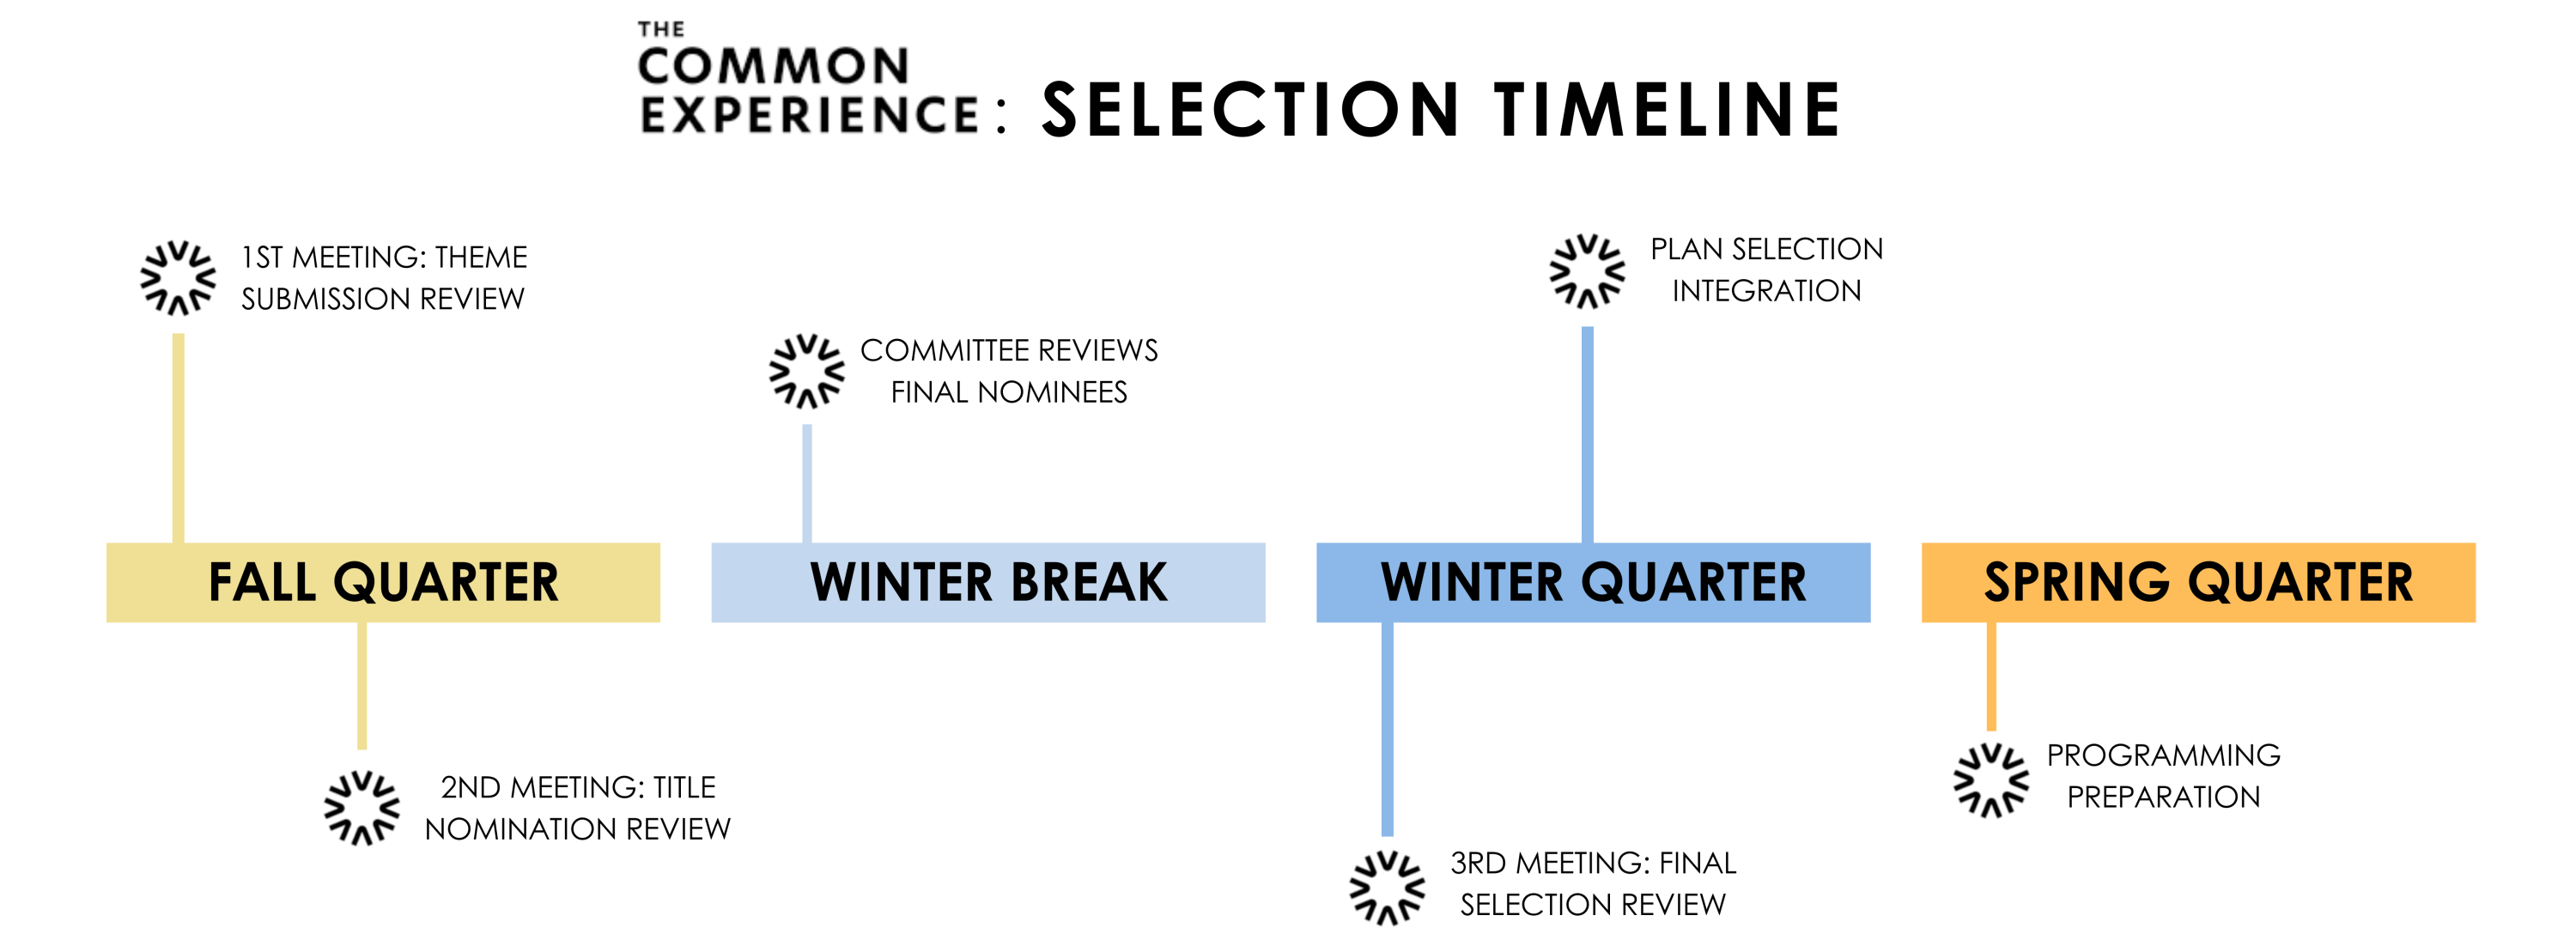 image of CE committee timeline